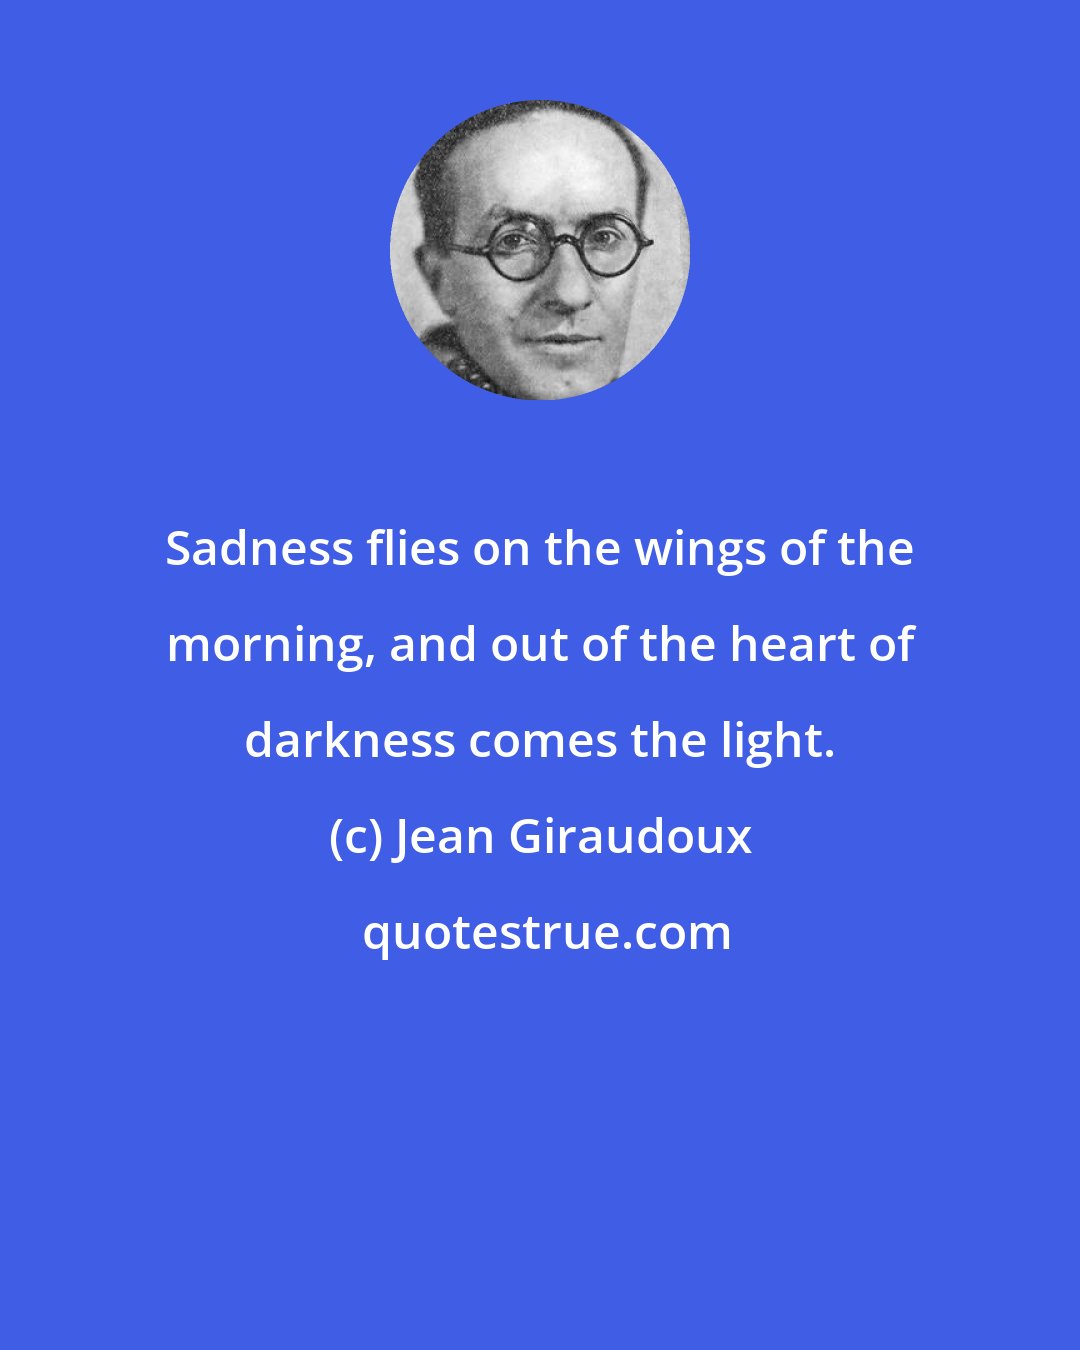 Jean Giraudoux: Sadness flies on the wings of the morning, and out of the heart of darkness comes the light.